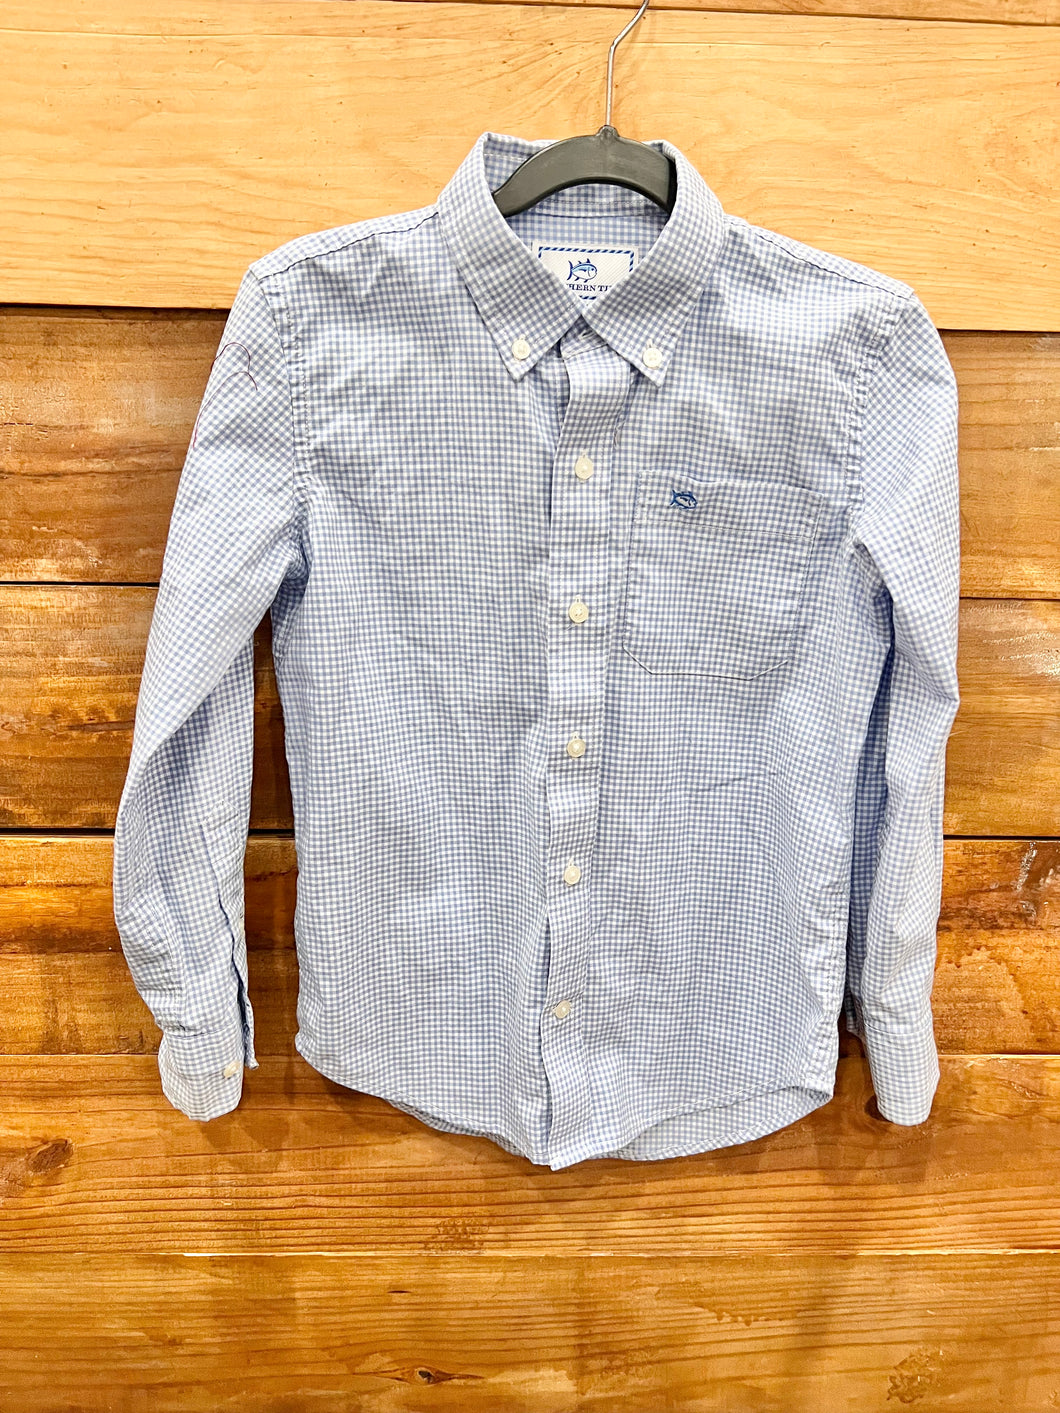 Southern Tide Blue Gingham Shirt Size 6-7